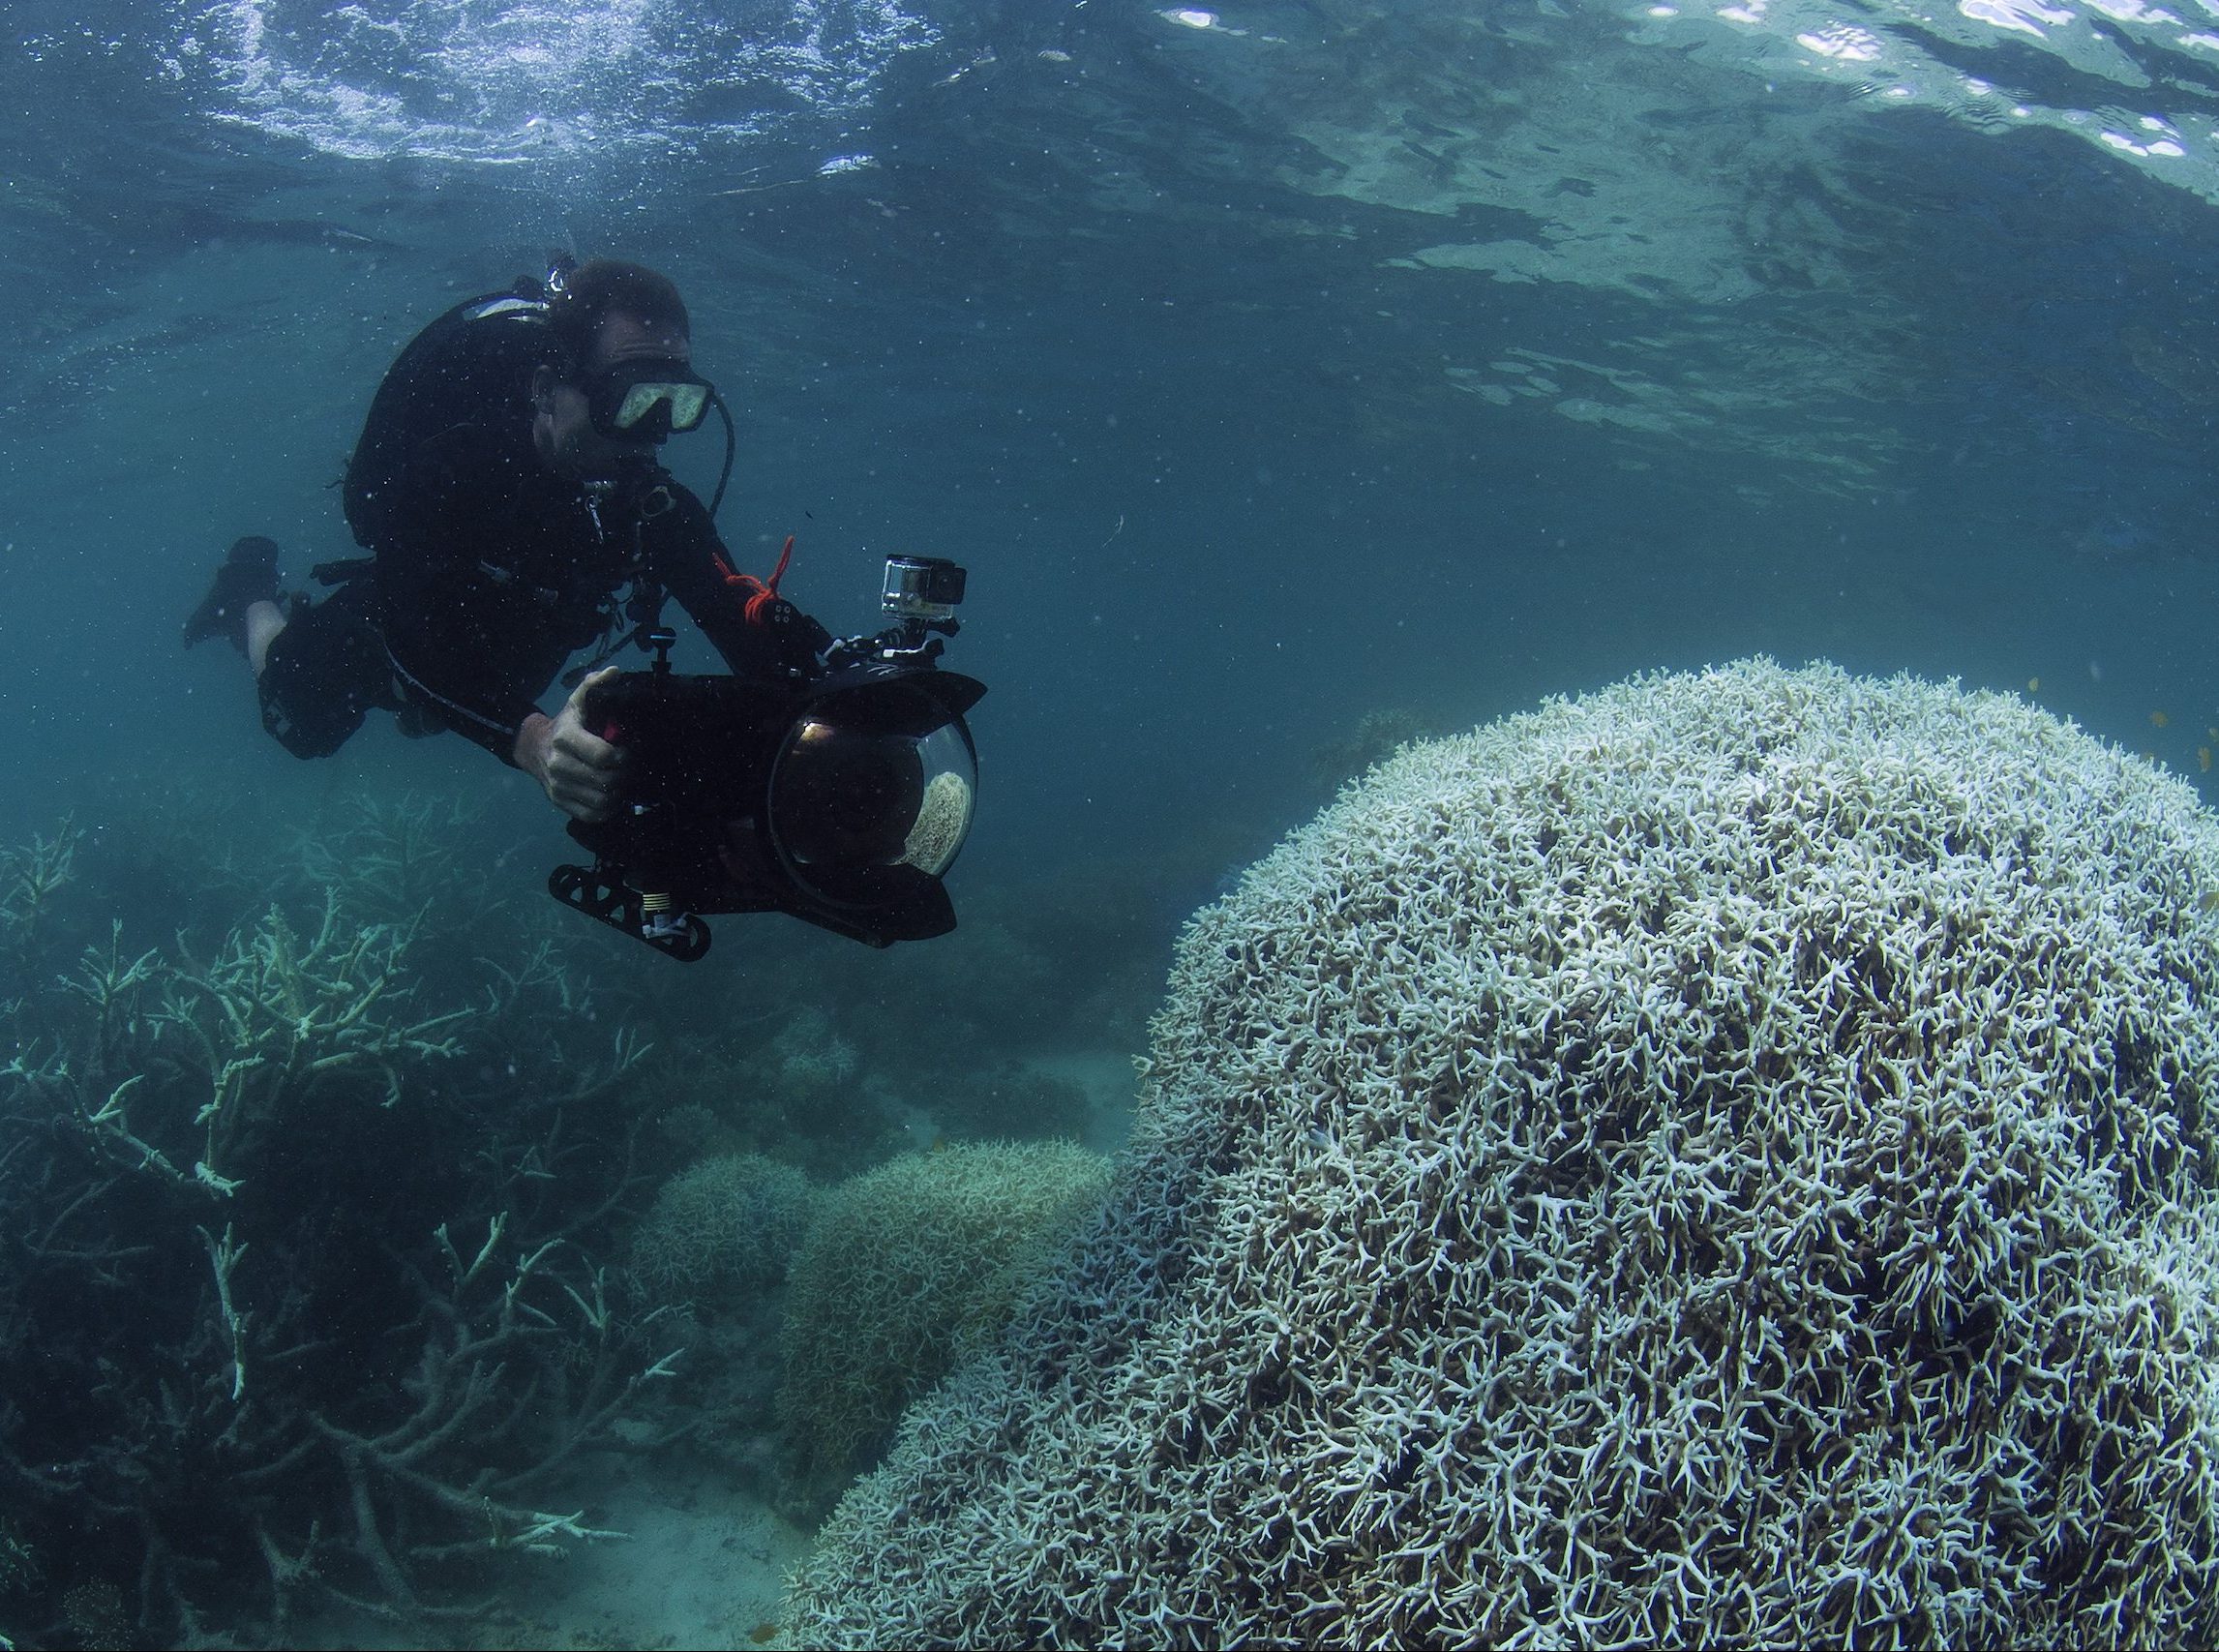 Scuba diver holding an underwater camera next to a bleached coral